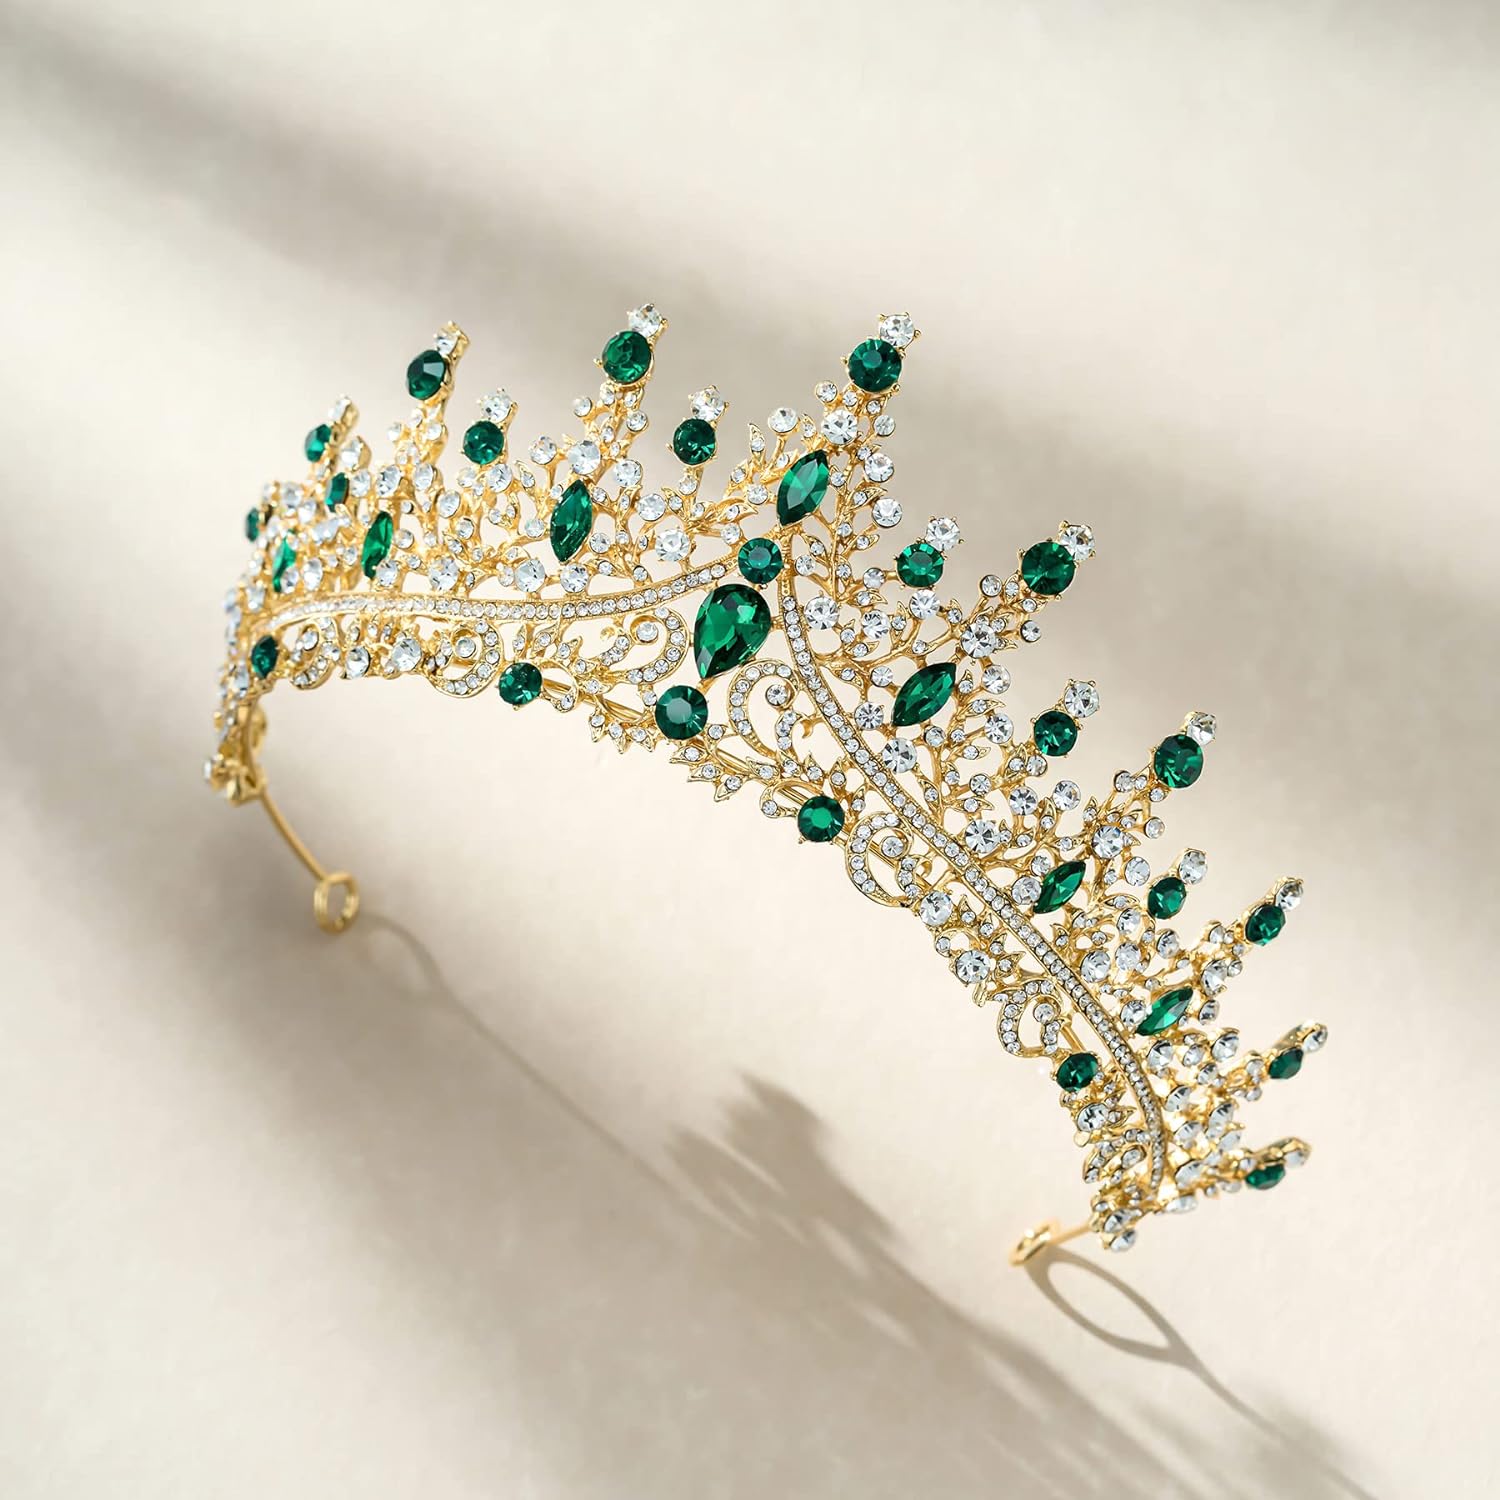 Green Gold Tiara Crown for Women Girls,Queen Crown Princess Diadem,Crystal Hair Accessories for Quinceanera Pageant Prom Birthday,Audrey